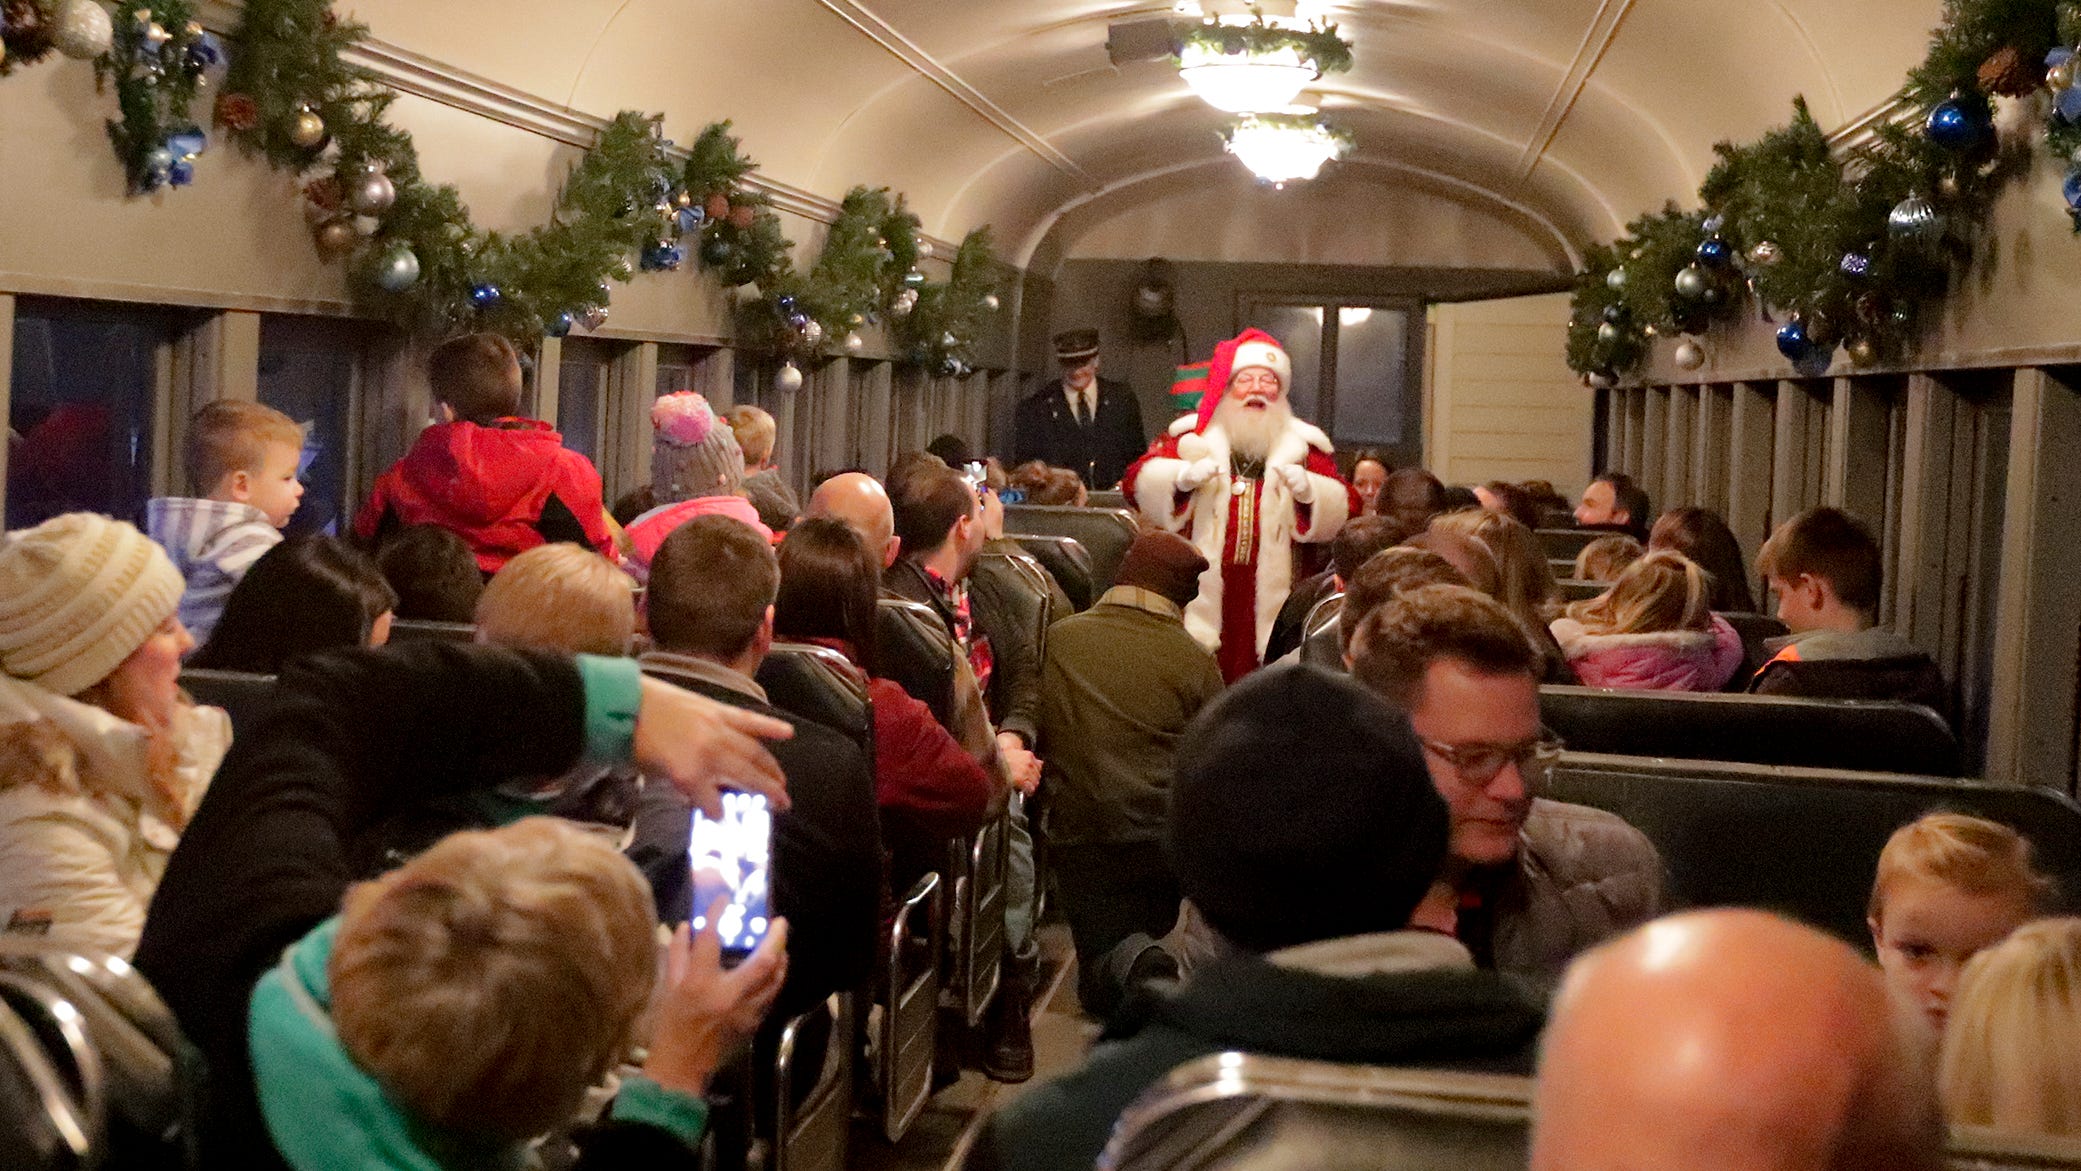 polar-express-train-ride-sells-out-at-national-railroad-museum